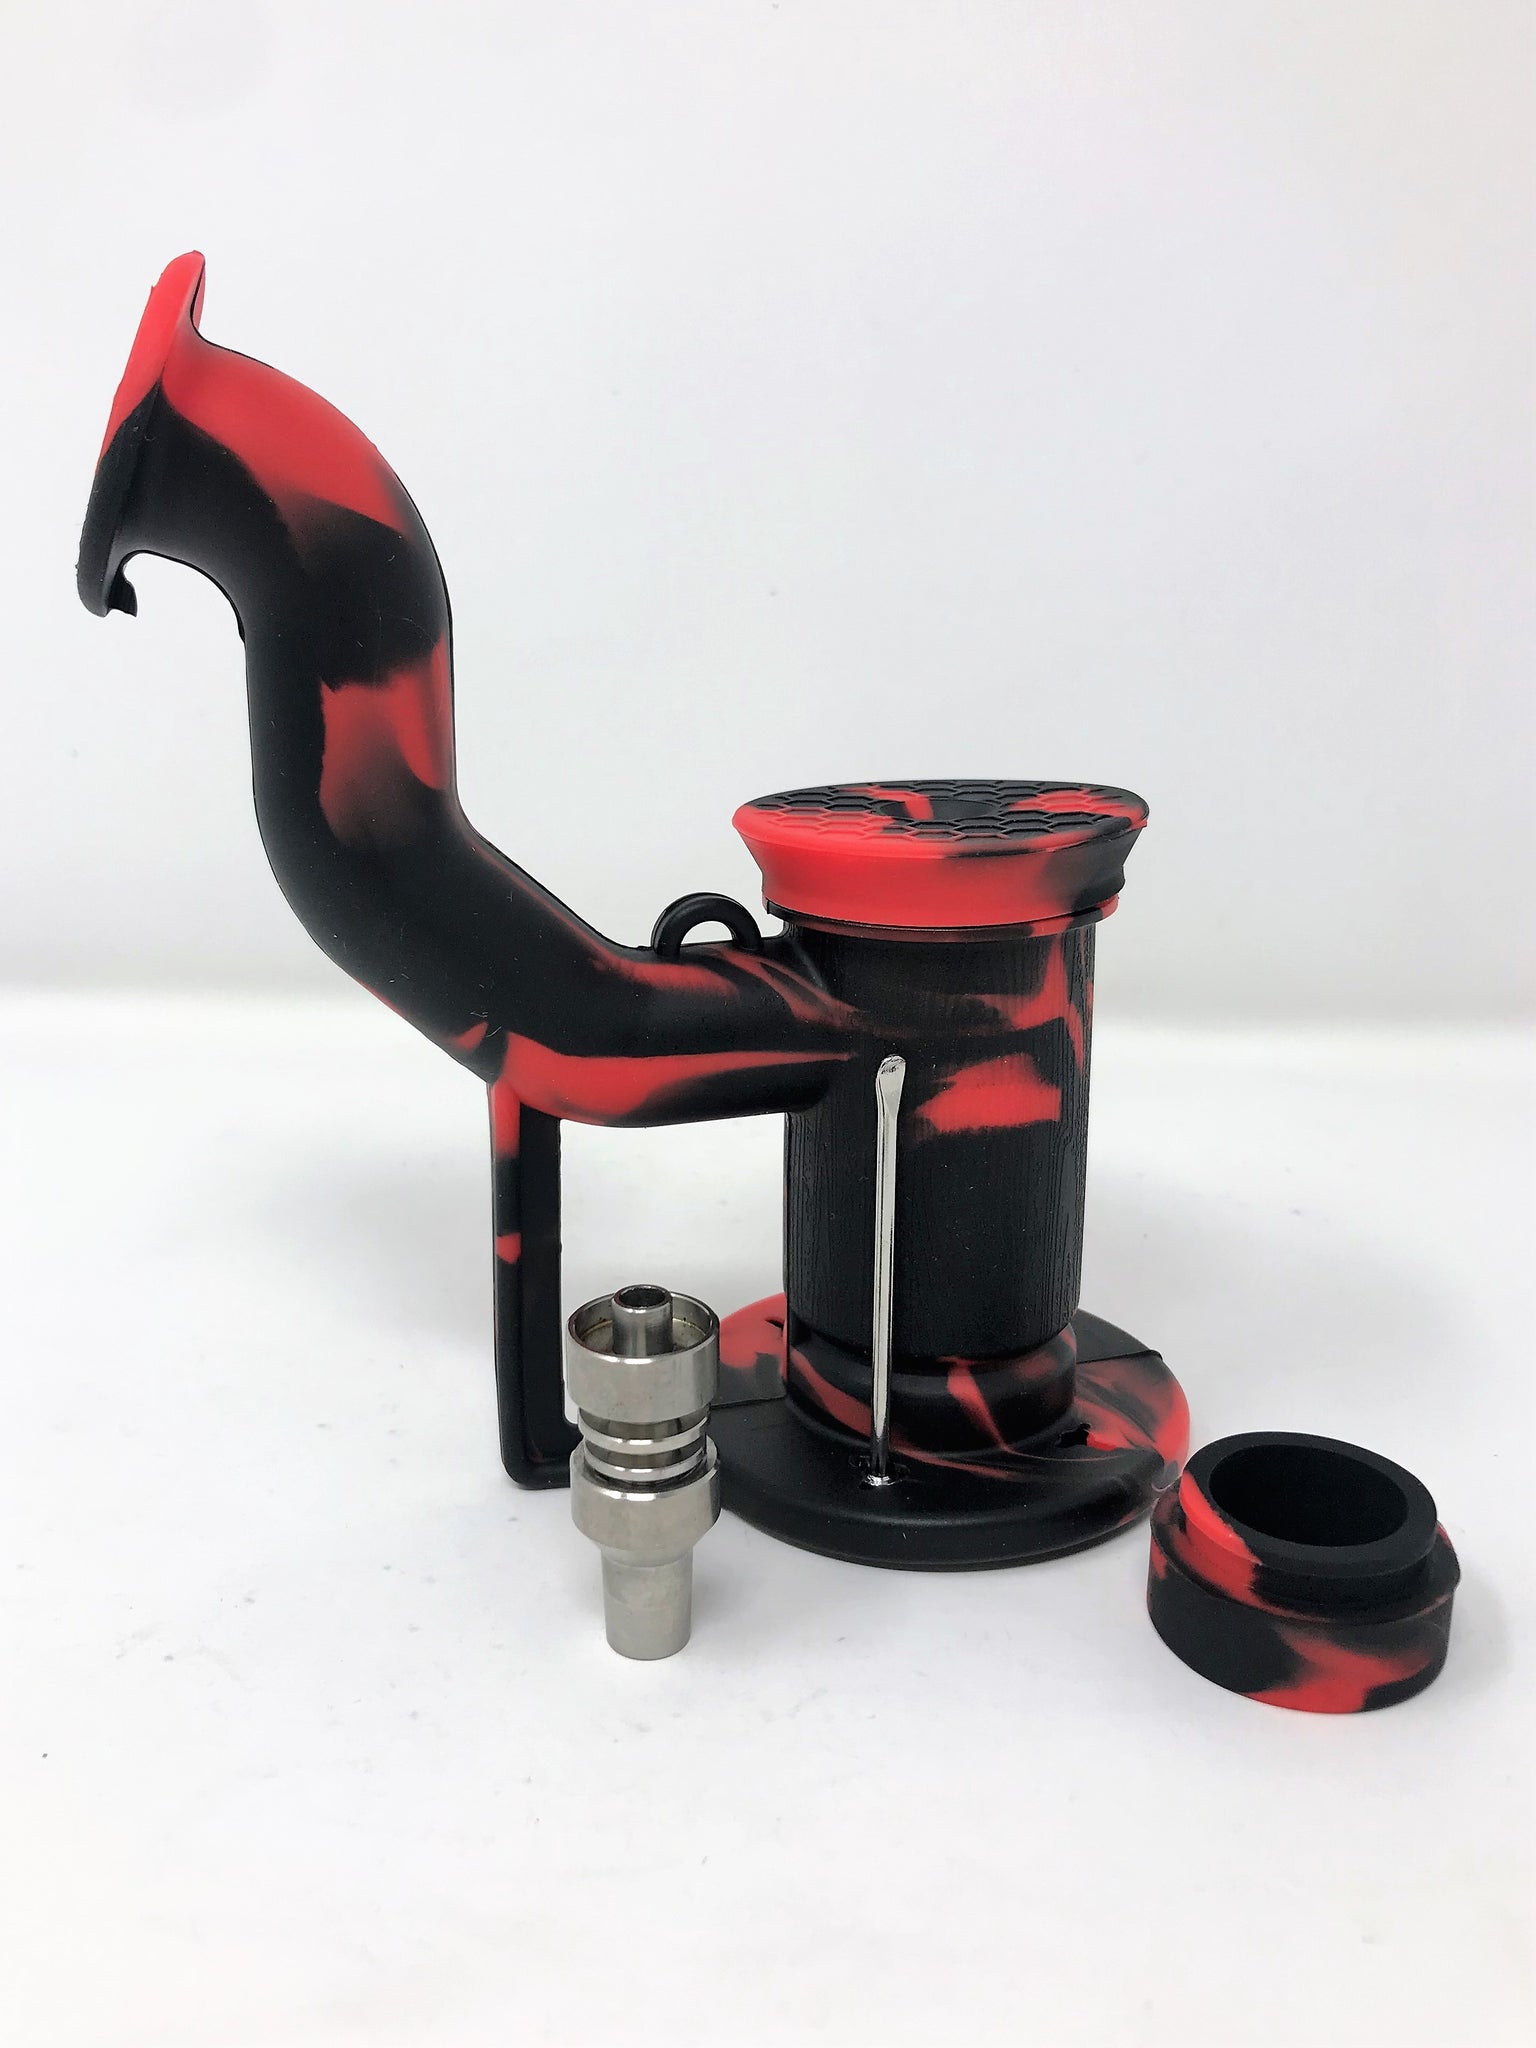 1 Set Hookah Glass Water Pipe Smoke Pipe Feb Egg Dab Rig 8.2 Inch With 14mm  Quartz Banger And Tabacco Bowl Smoke Accessory